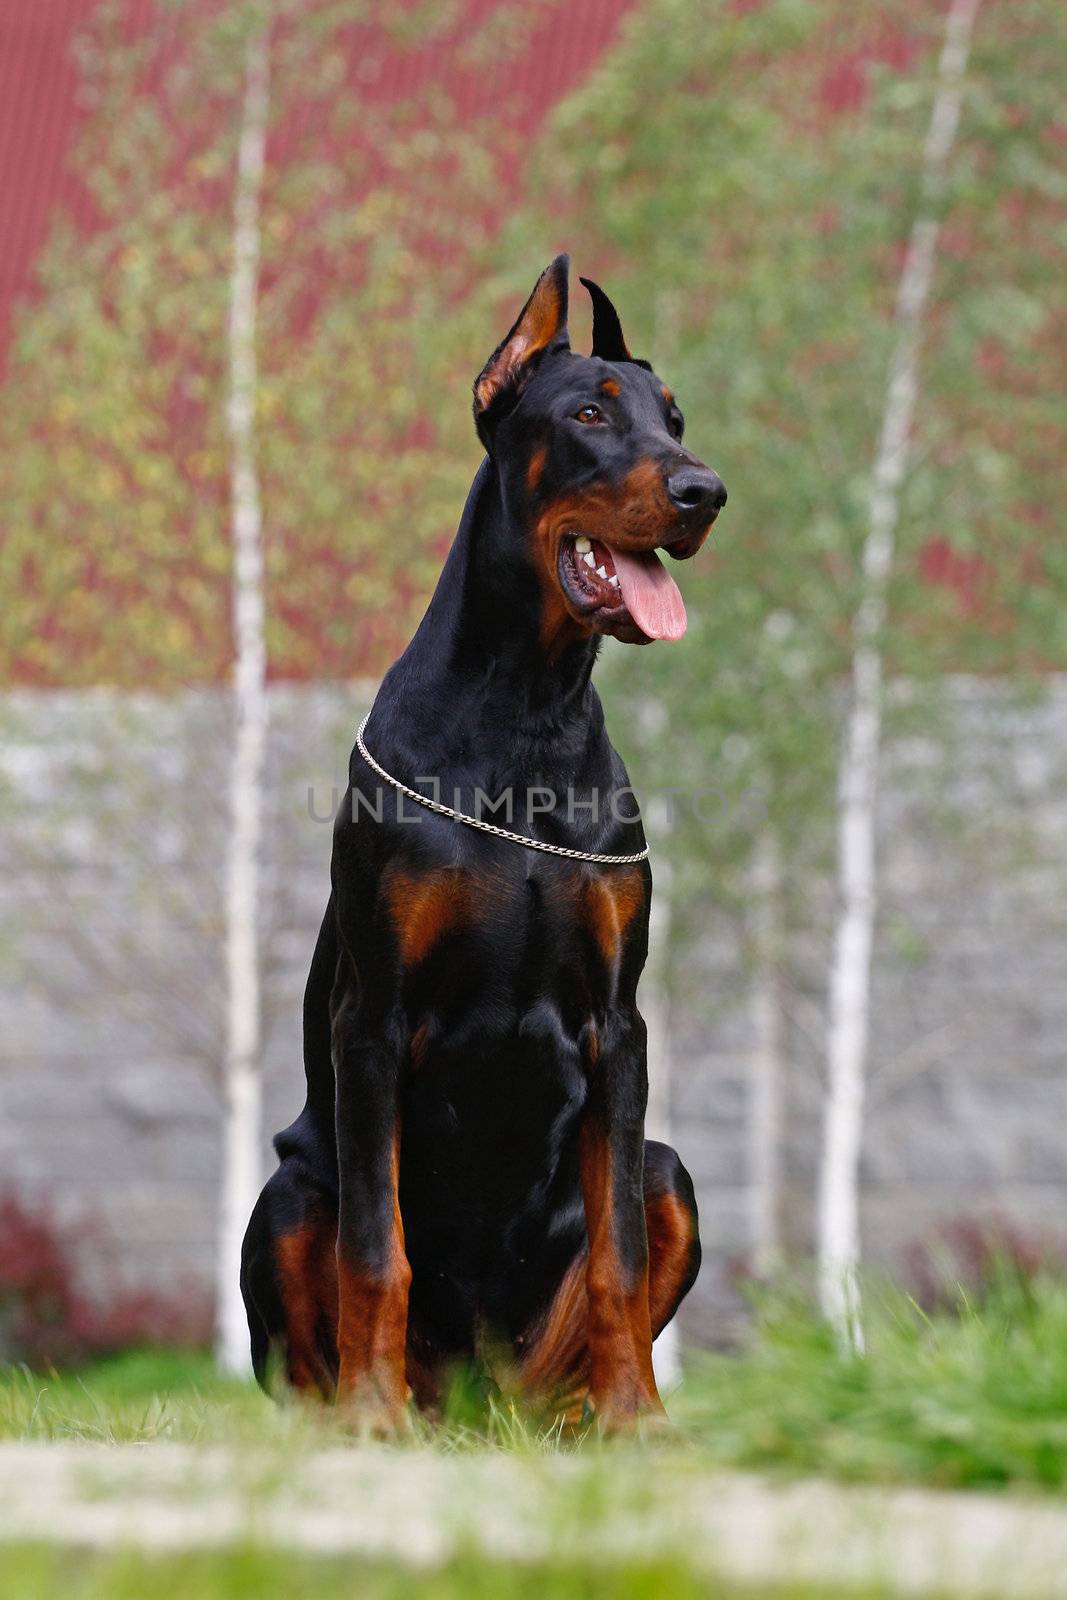 The Doberman Pinscher (alternatively spelled Dobermann in many countries) or Doberman is a breed of domestic dog. Dobermann Pinschers are among the most common of pet breeds, and the breed is well known as an intelligent, alert, and loyal companion dog. Although once commonly used as guard dogs, watch dogs, or police dogs, this is less common today. In many countries, Dobermann Pinschers are one of the most recognizable breeds, in part because of their actual roles in society, and in part because of media attention (see temperament). Careful breeding has improved the disposition of this breed, and the modern Dobermann Pinscher is an energetic and lively breed suitable for companionship and family life.